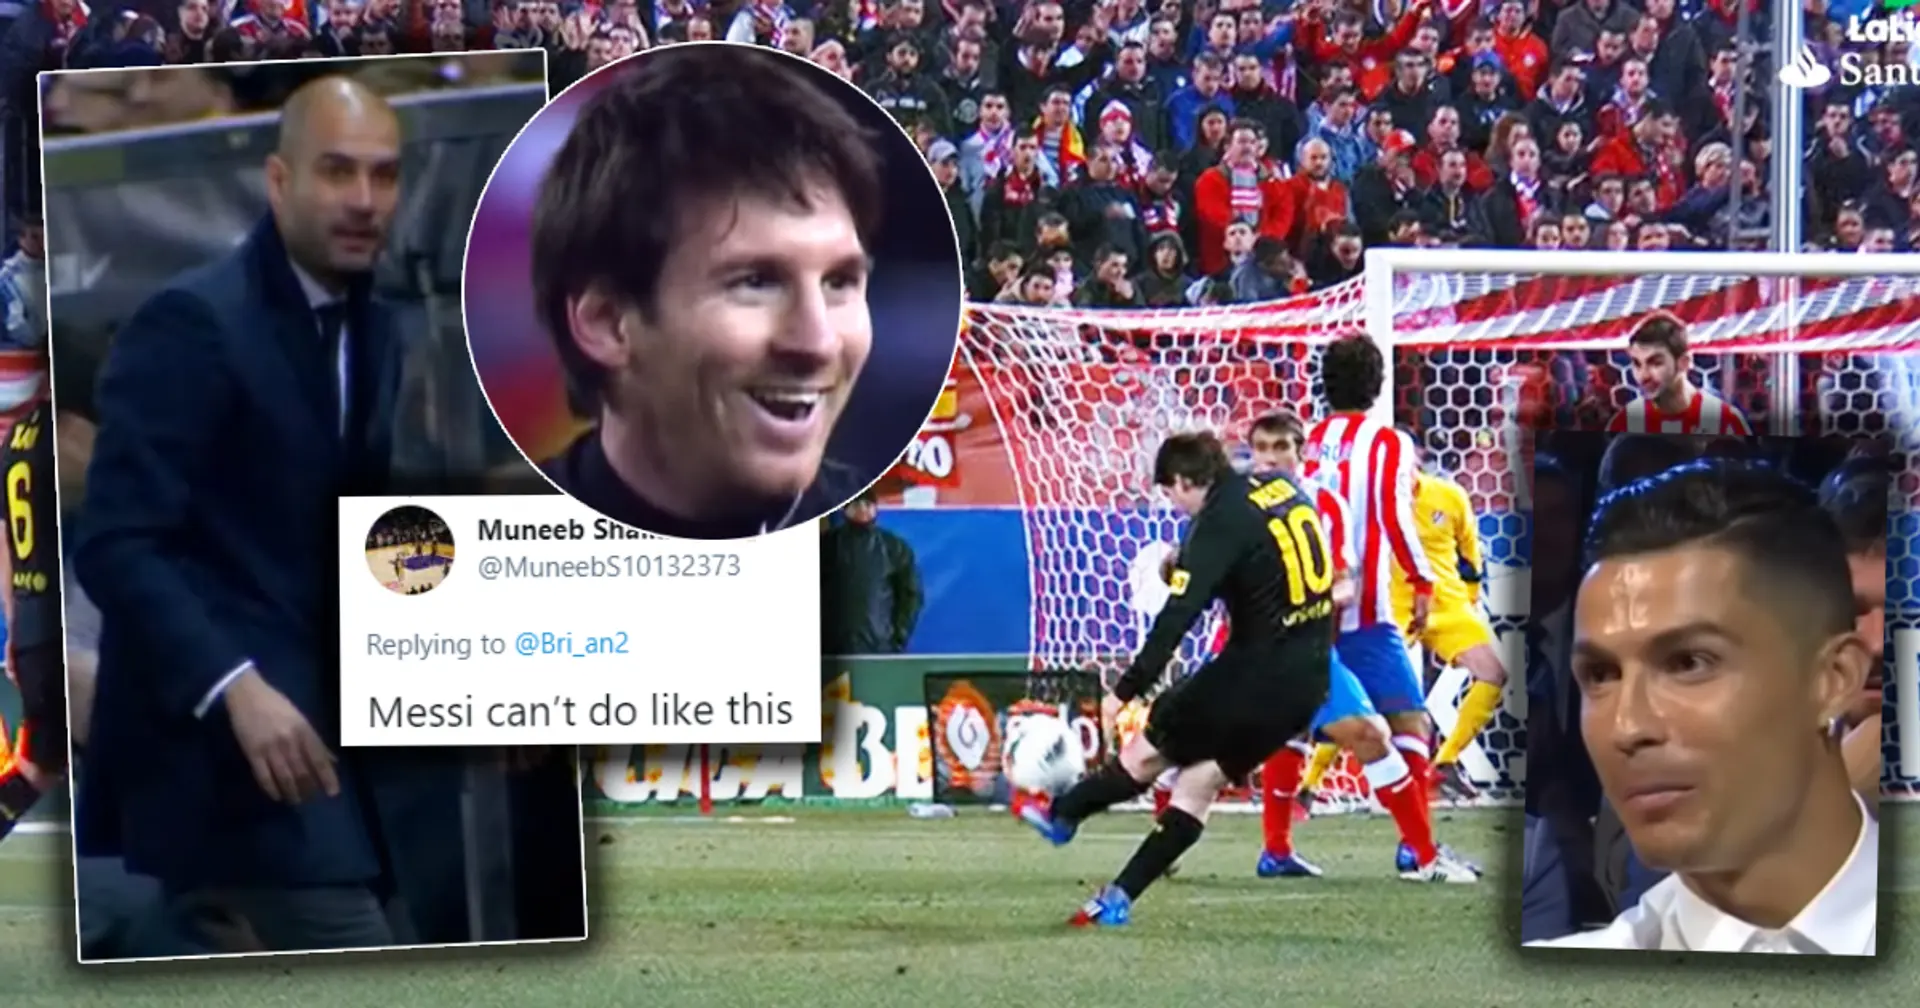 'Messi can't do like this': Madrid fan believes he found free-kick Ronaldo scored but Leo didn't – loses 'debate' immediately